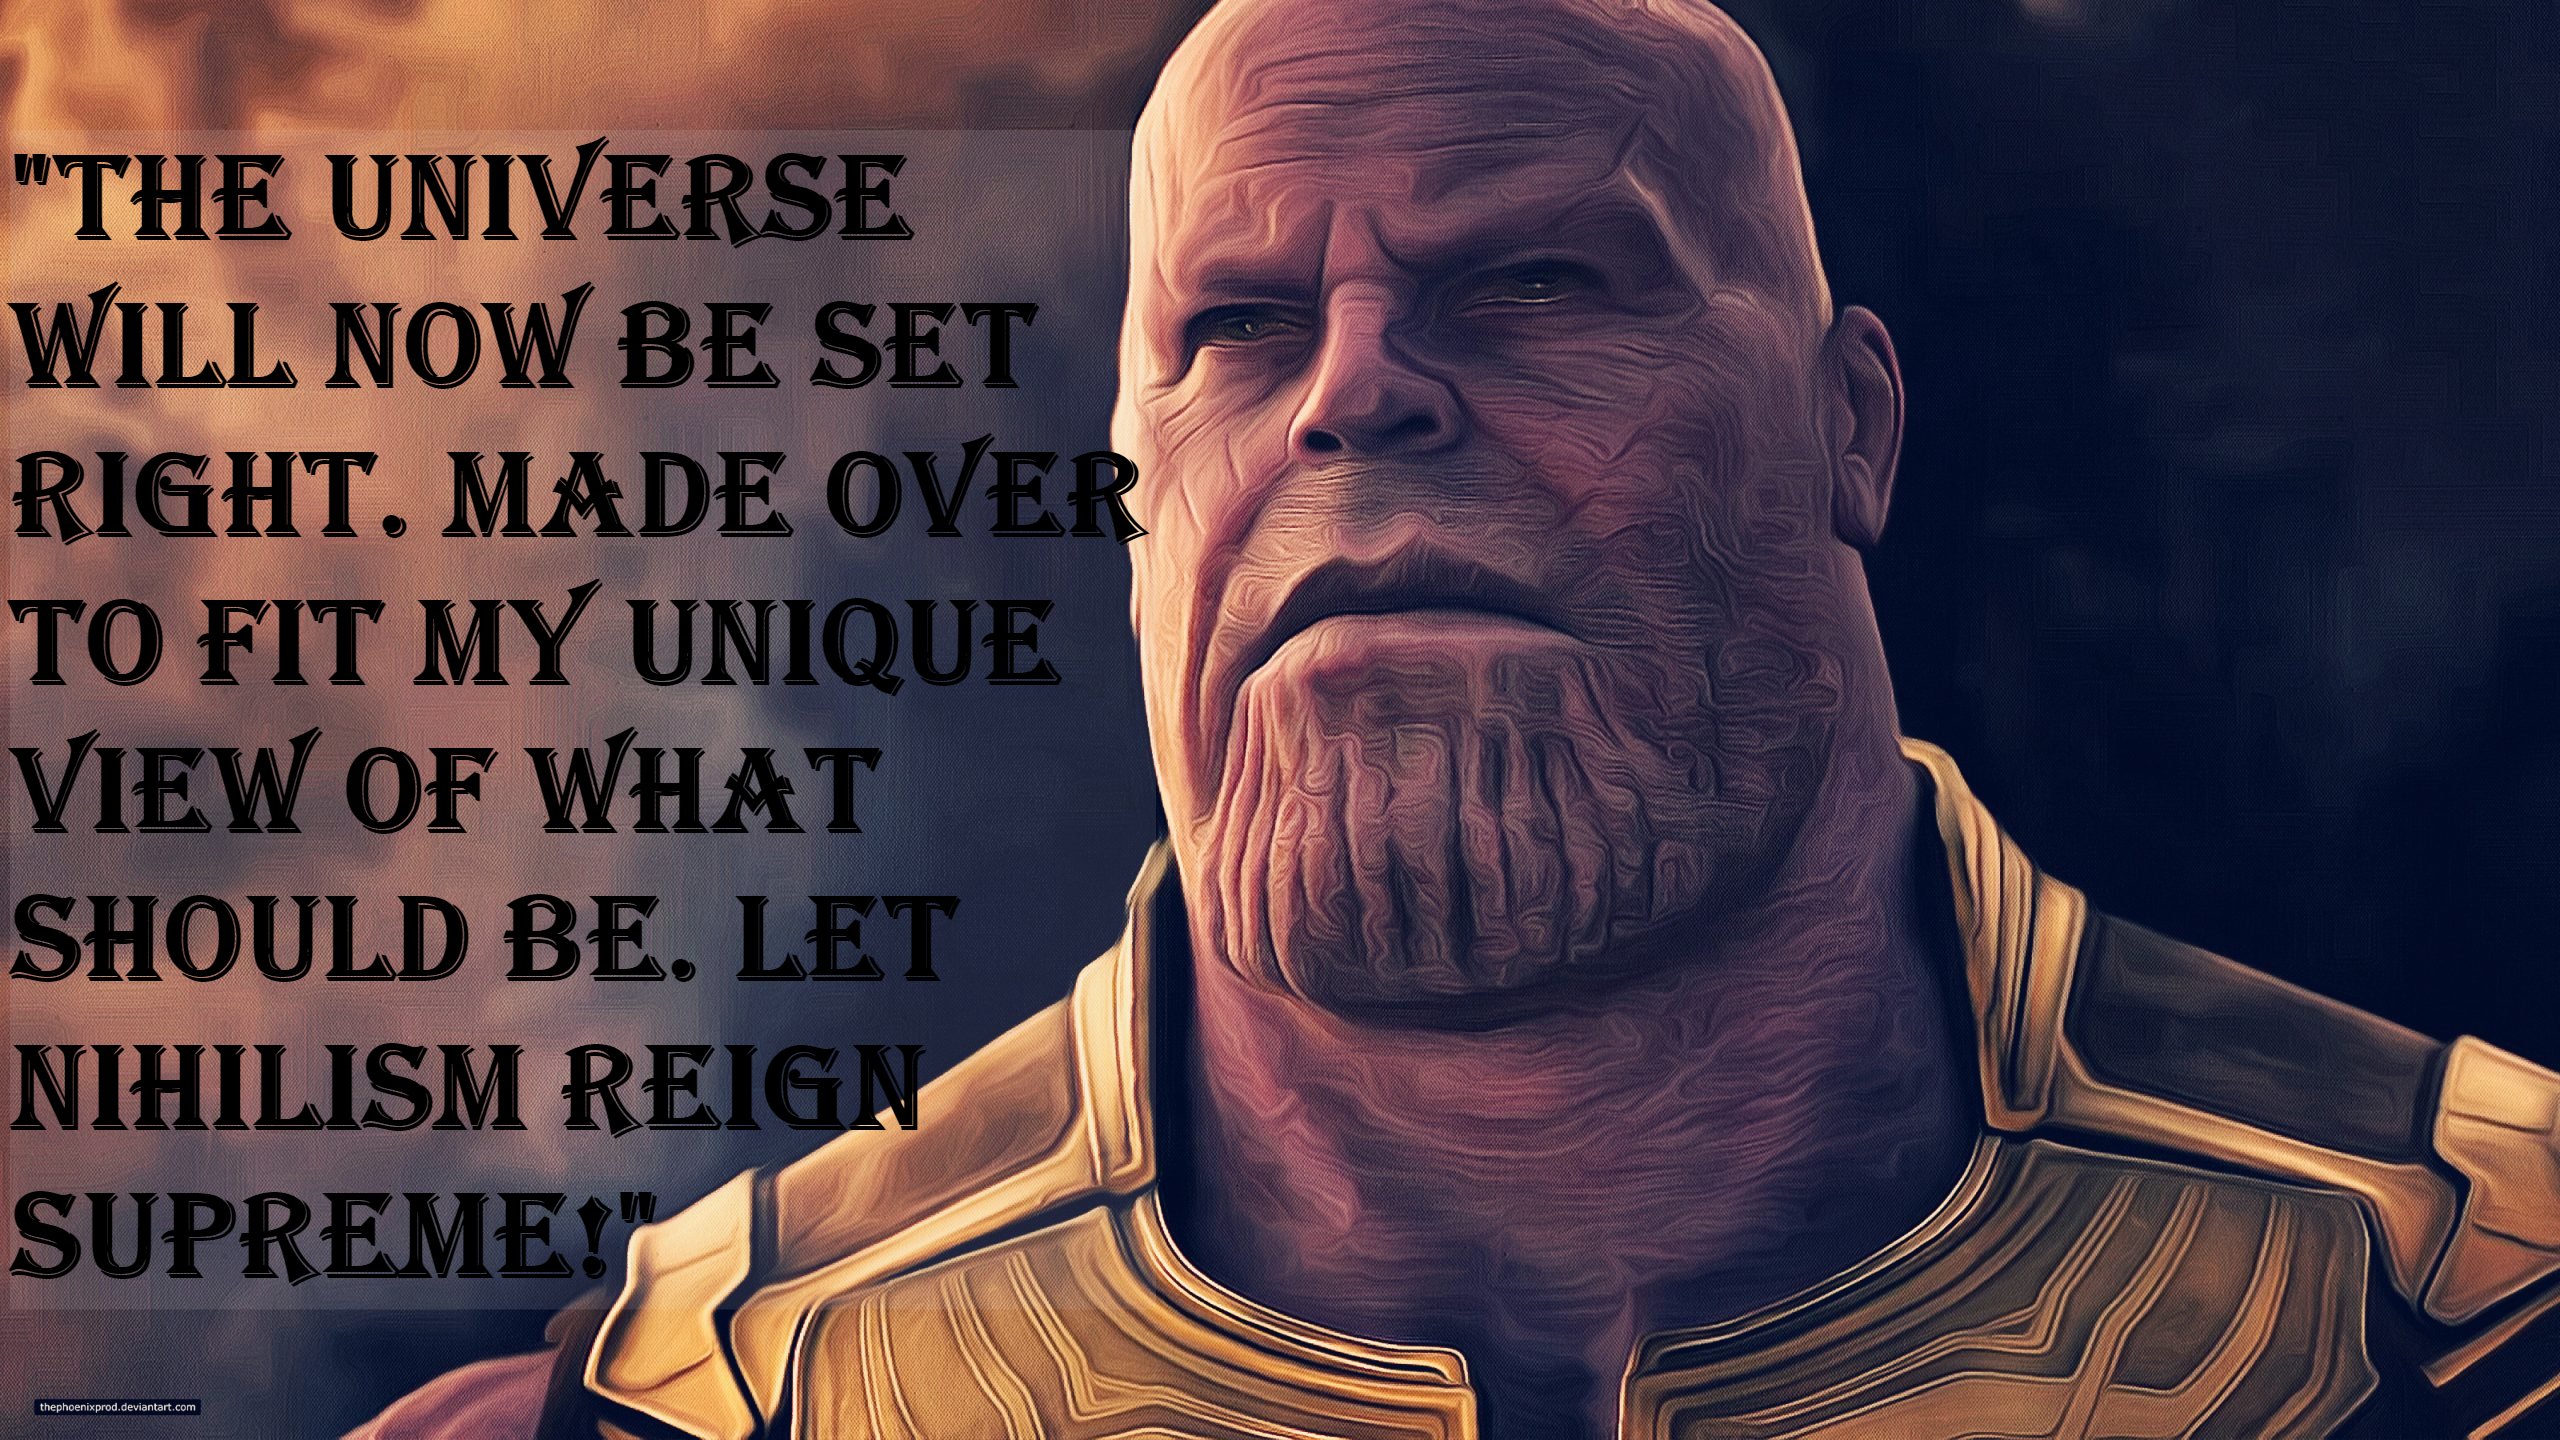 Thanos peace quotes 25 greatest thanos quotes from the marvel cinematic universe and